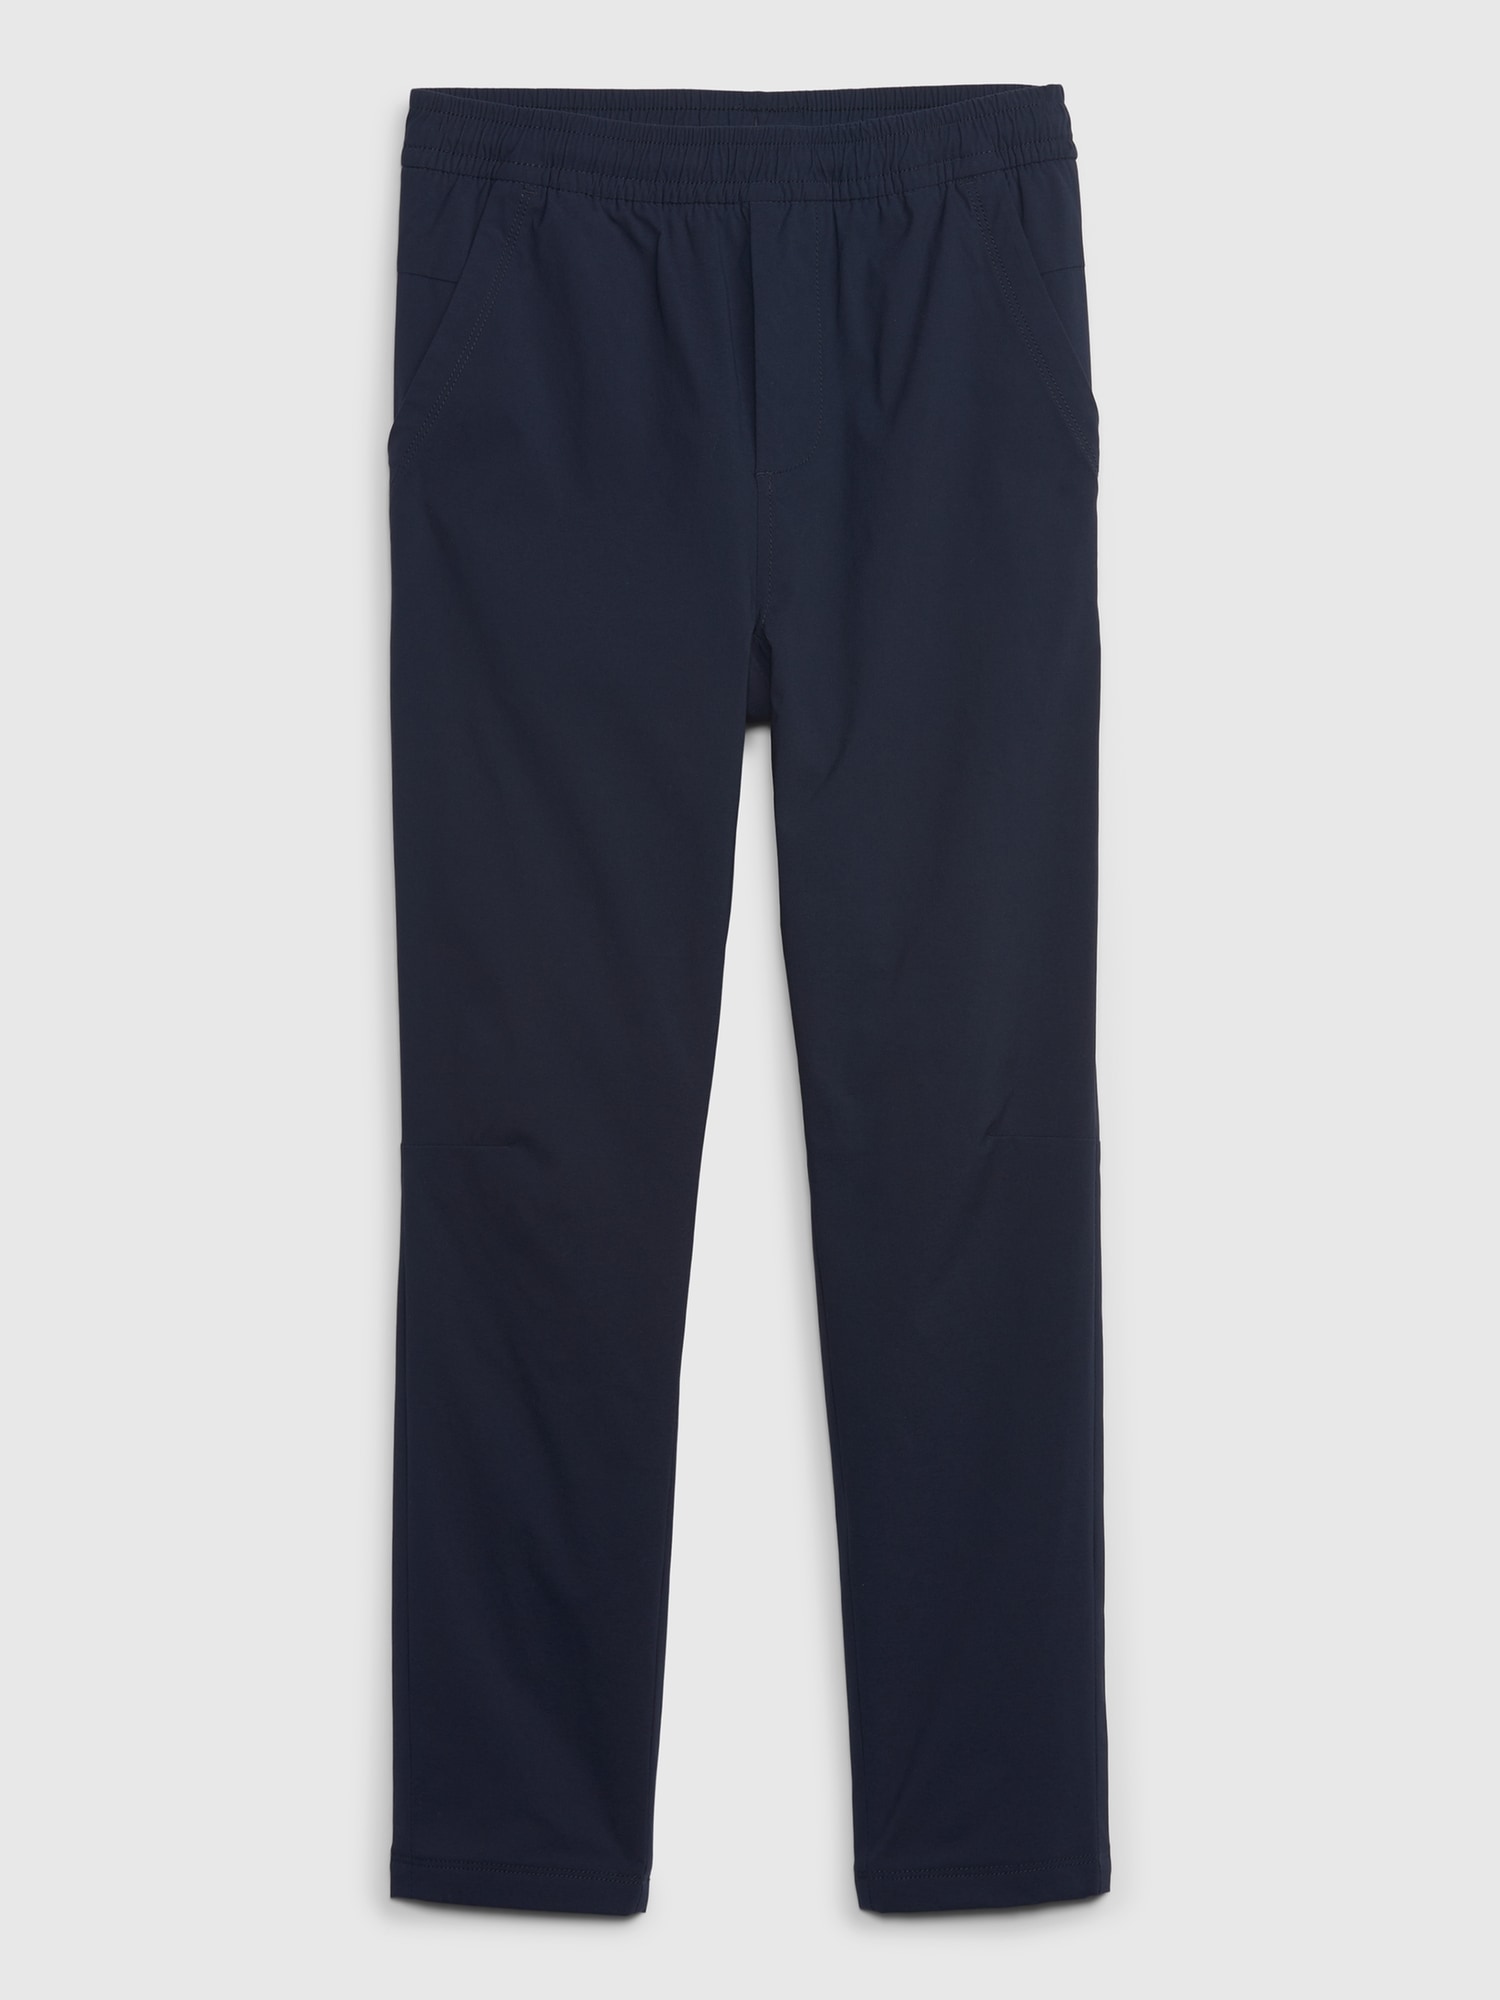 Kids Pile Lined Joggers